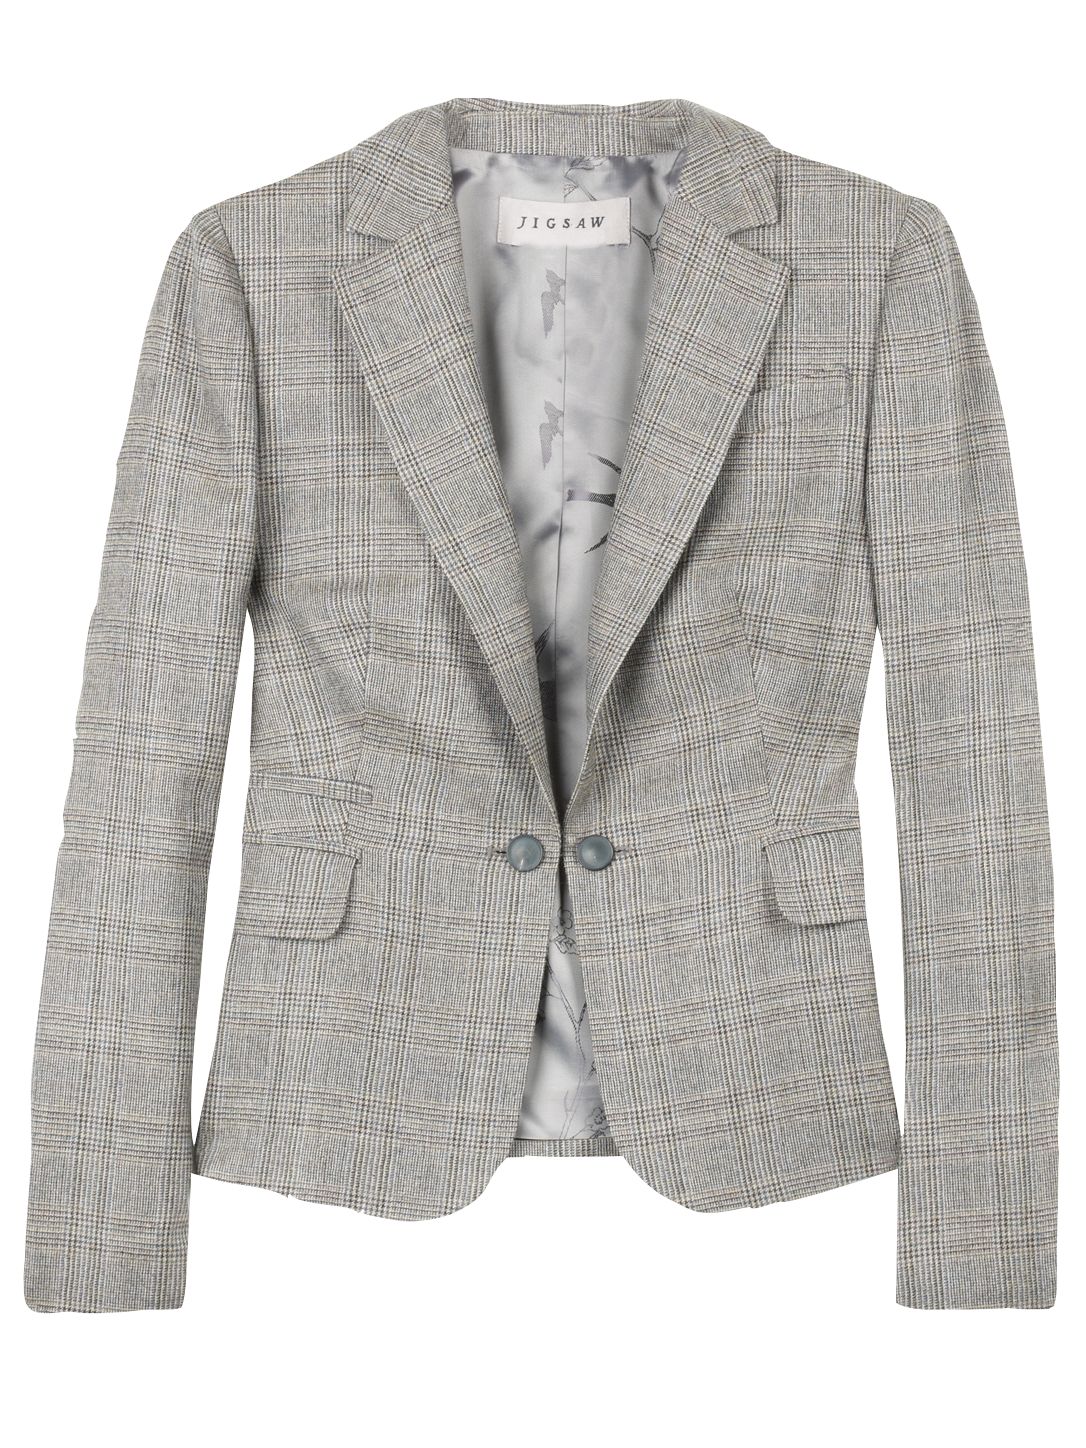 Jigsaw Prince of Wales Tailored Jacket, Taupe at John Lewis